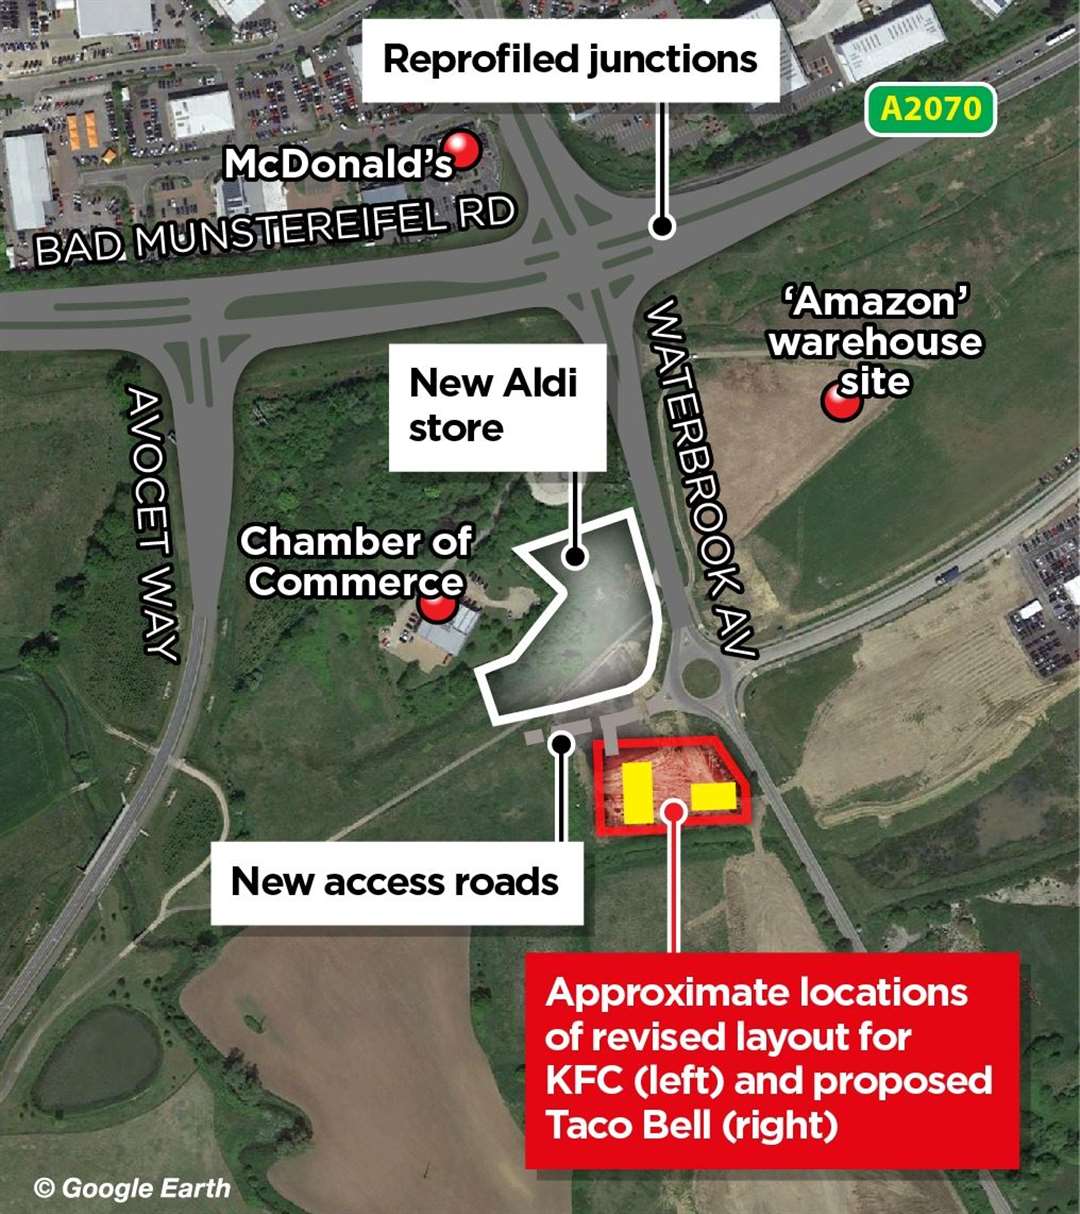 The Aldi store is set to be built on the Waterbrook Park estate off A2070 Bad Munstereifel Road